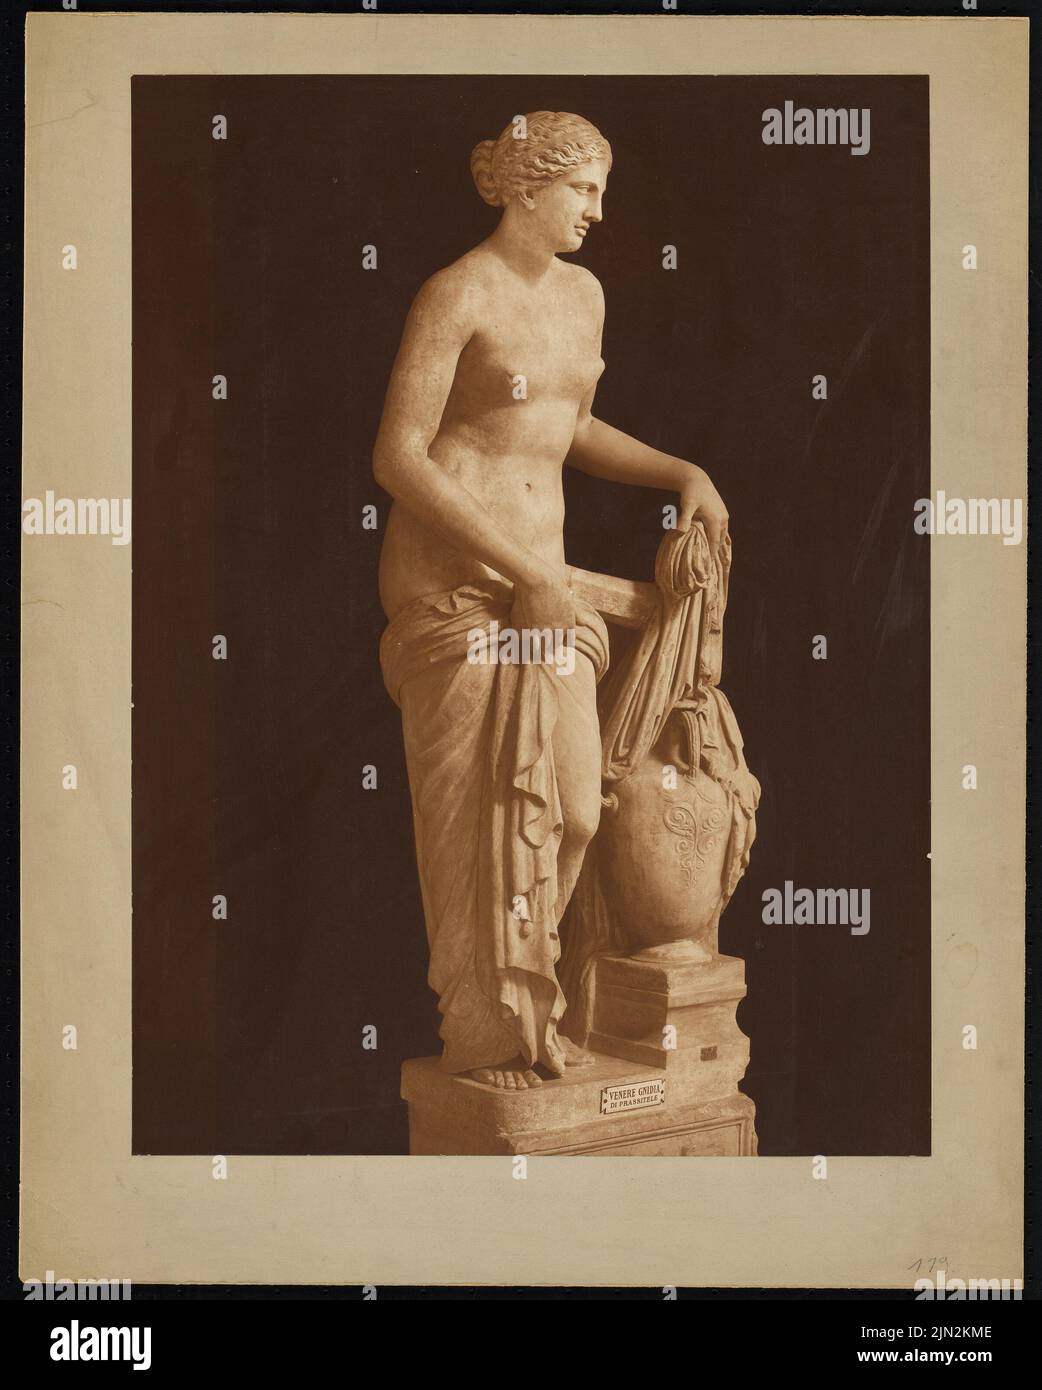 Unknown photographer, Vatican museums, Rome. Venere Gnidia: View. Photo on cardboard, 65.2 x 52.3 cm (including scan edges) Stock Photo